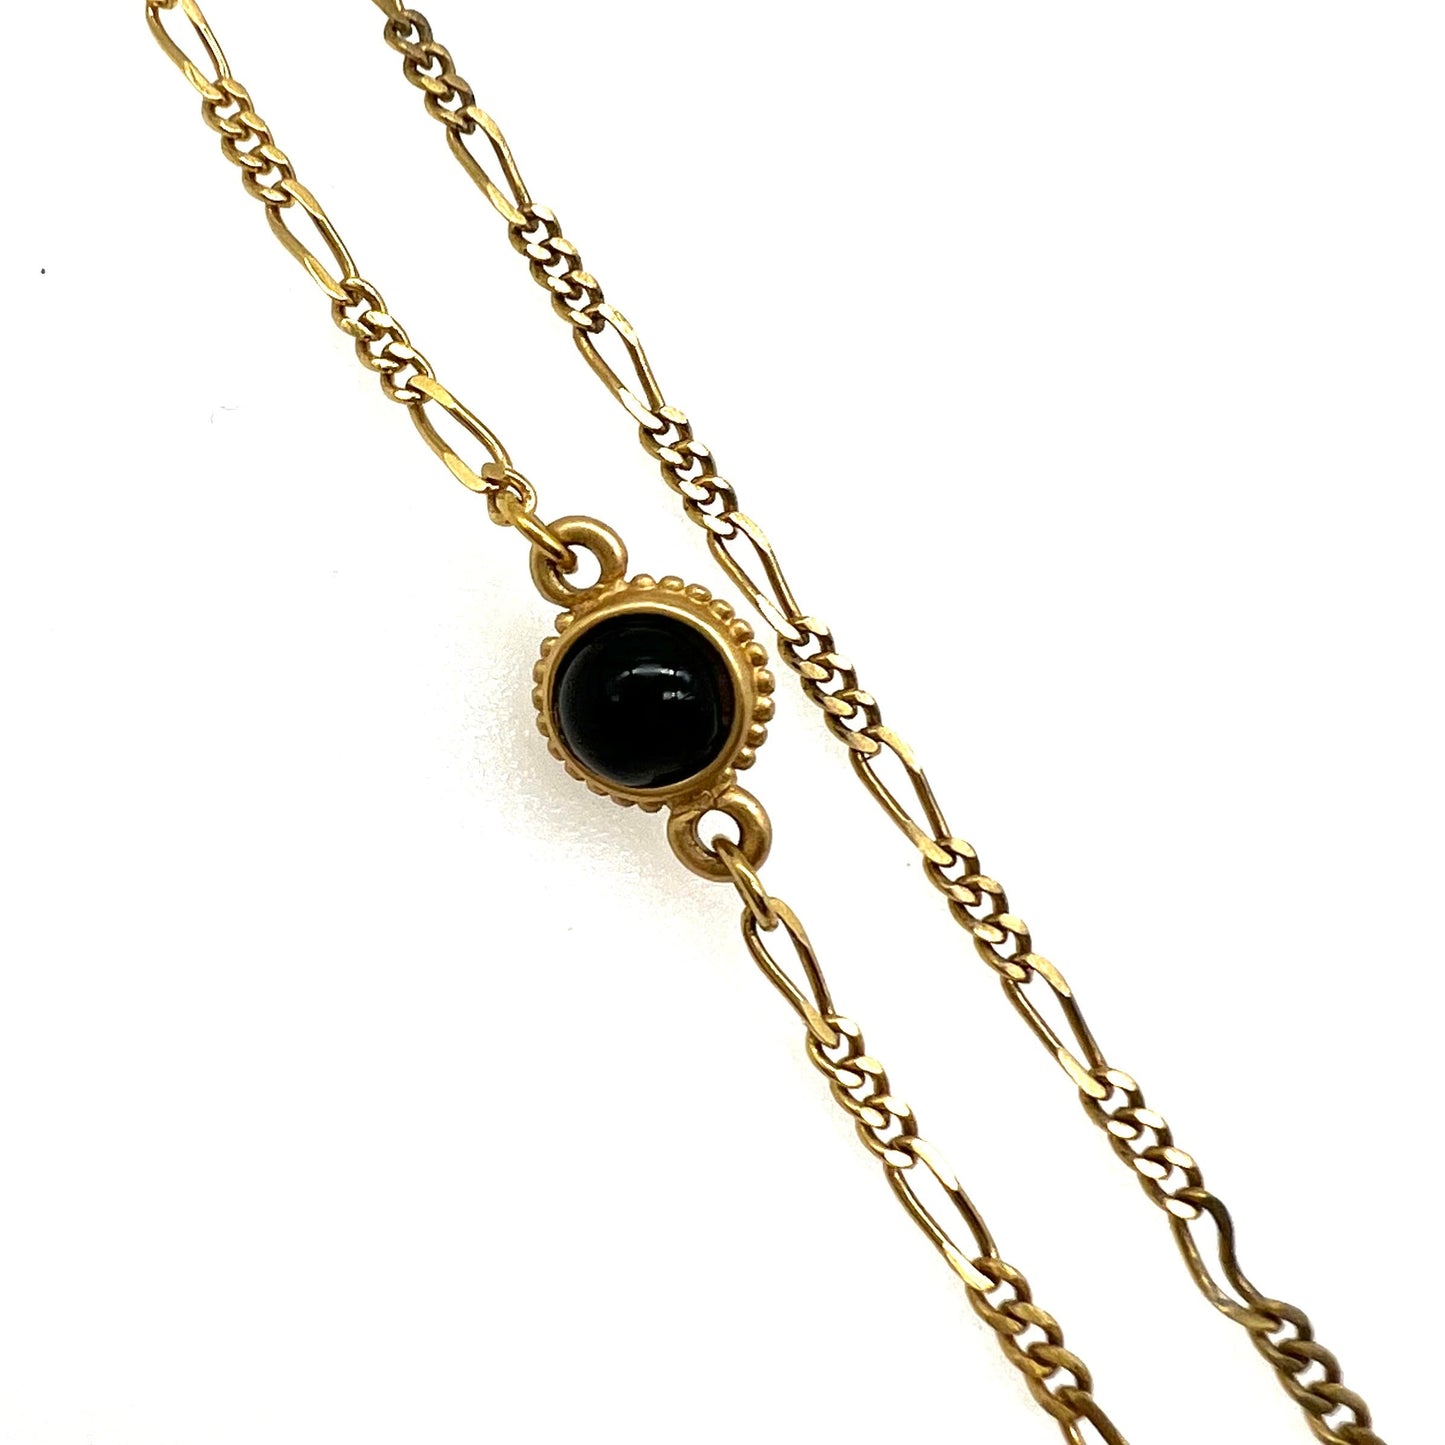 Monet Long Figaro Station Necklace with Black Glass Fob Pendant